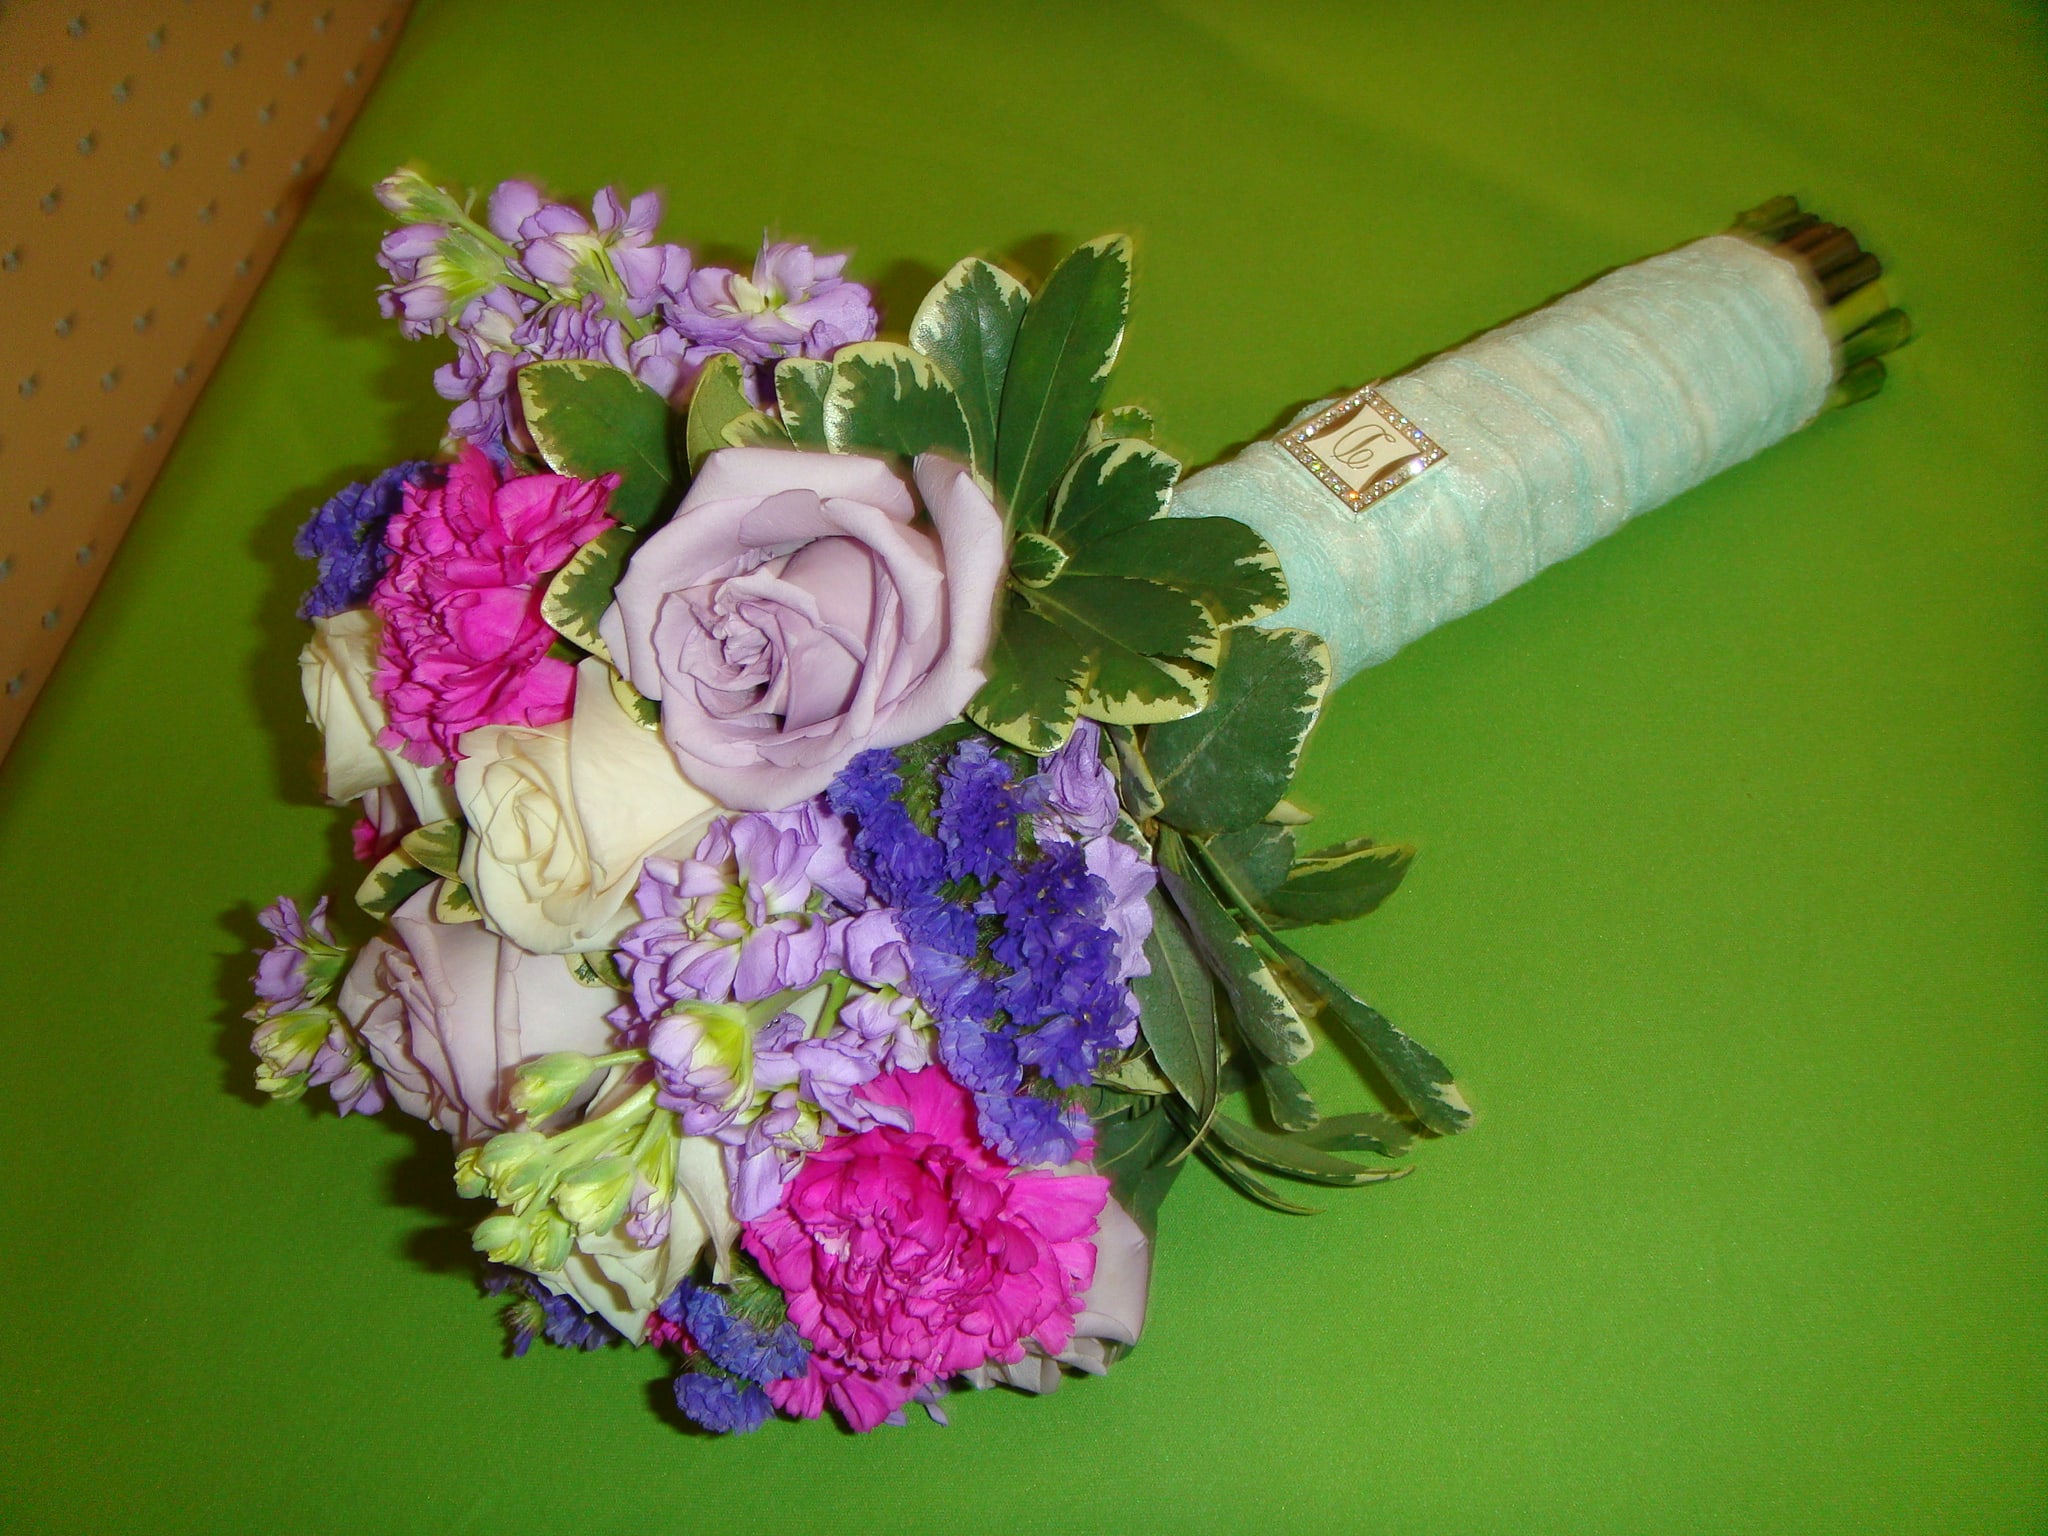 Beautiful Bride Boquet CALL FOR PRICING - All Wedding Event Pricing Done In Shop With Scheduled Consultation